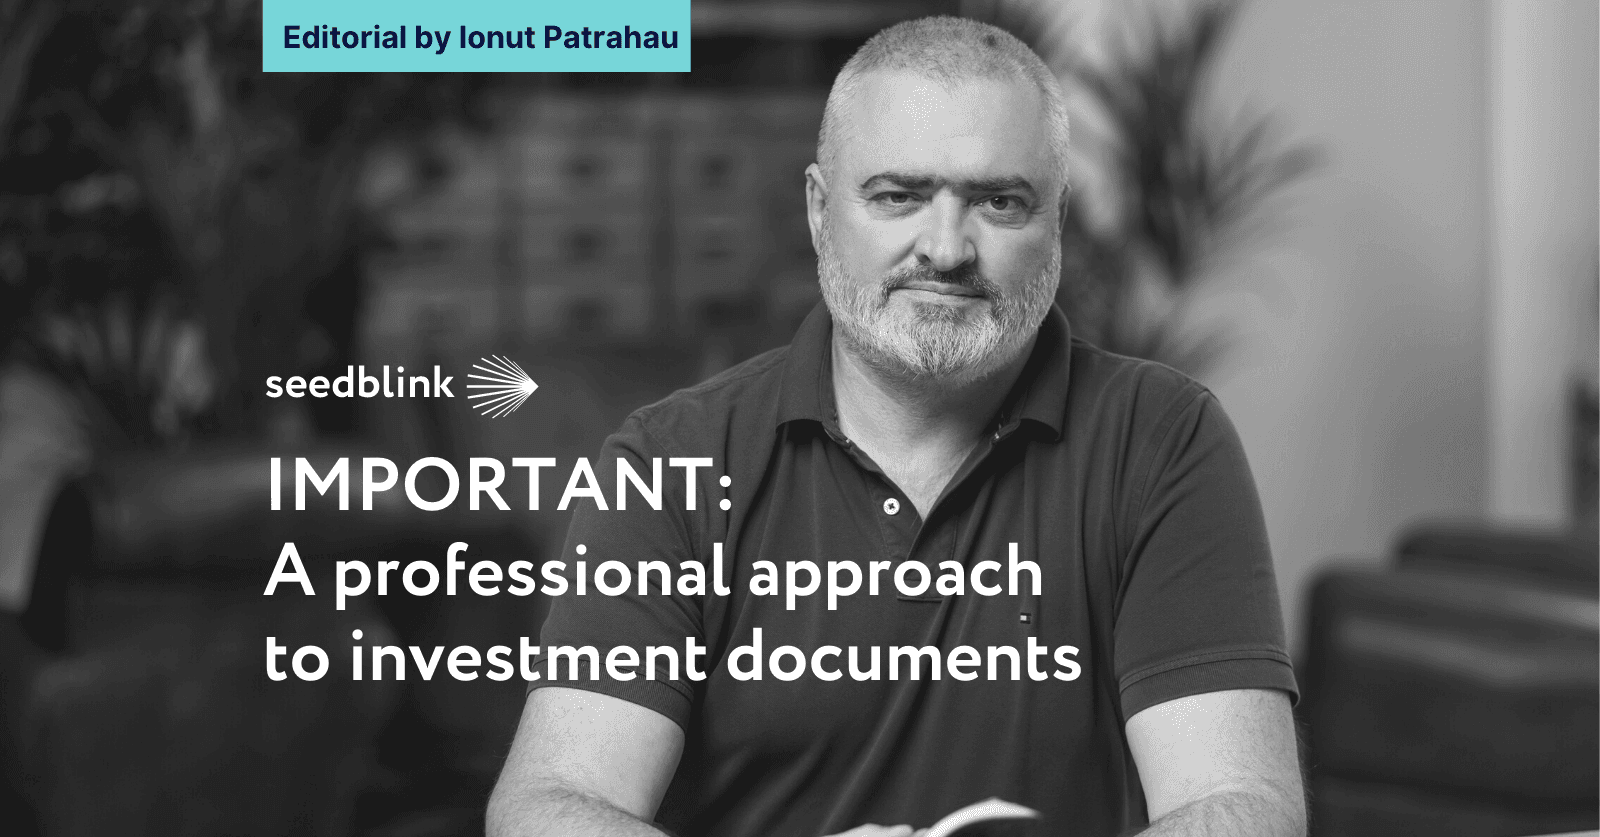 A professional approach to investment documents - Editorial by Ionut Patrahau